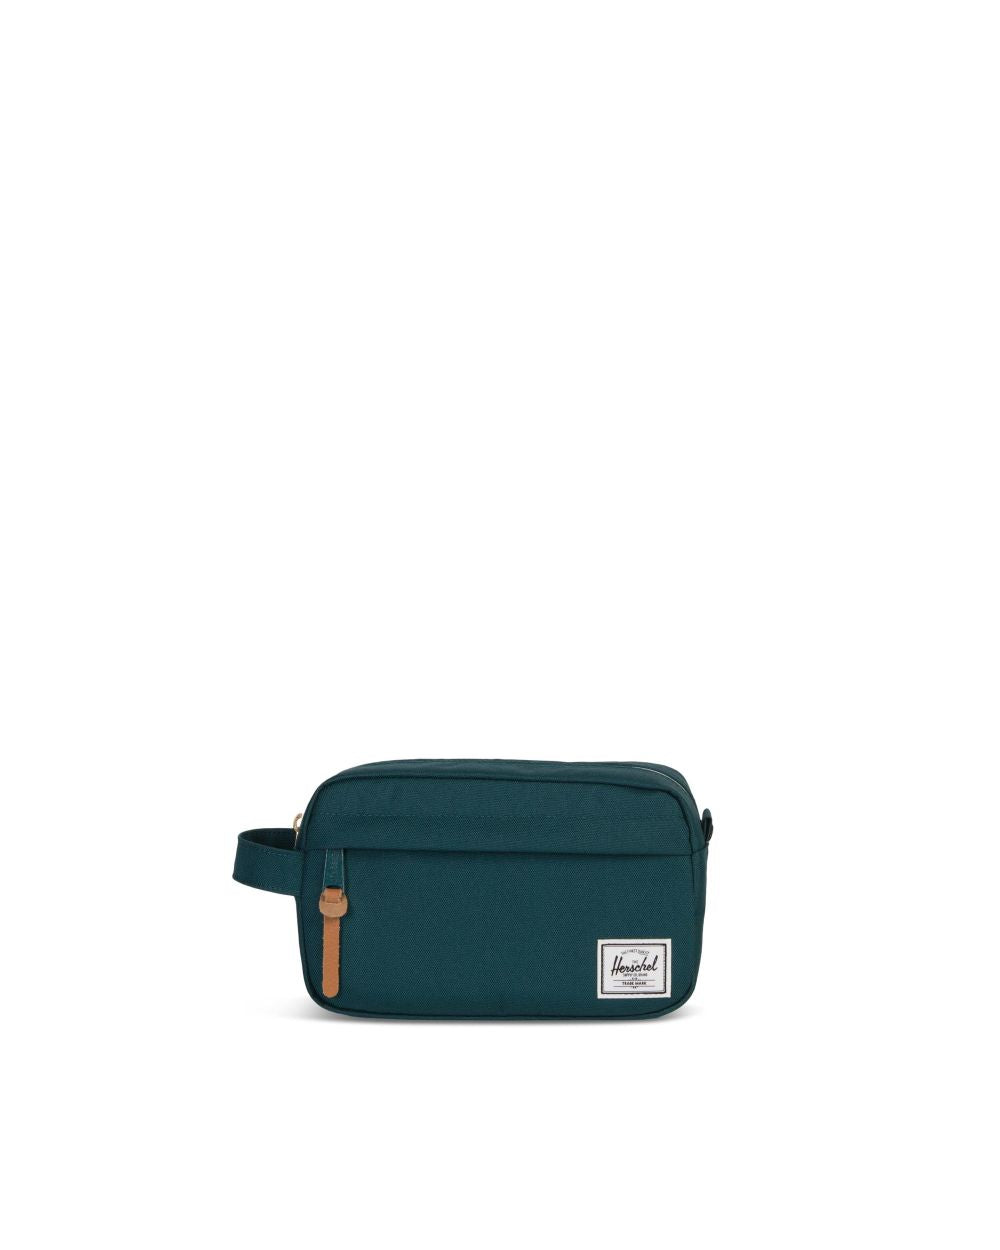 Herschel Supply Co -  Chapter Travel Kit Carry-On, Deep Teal